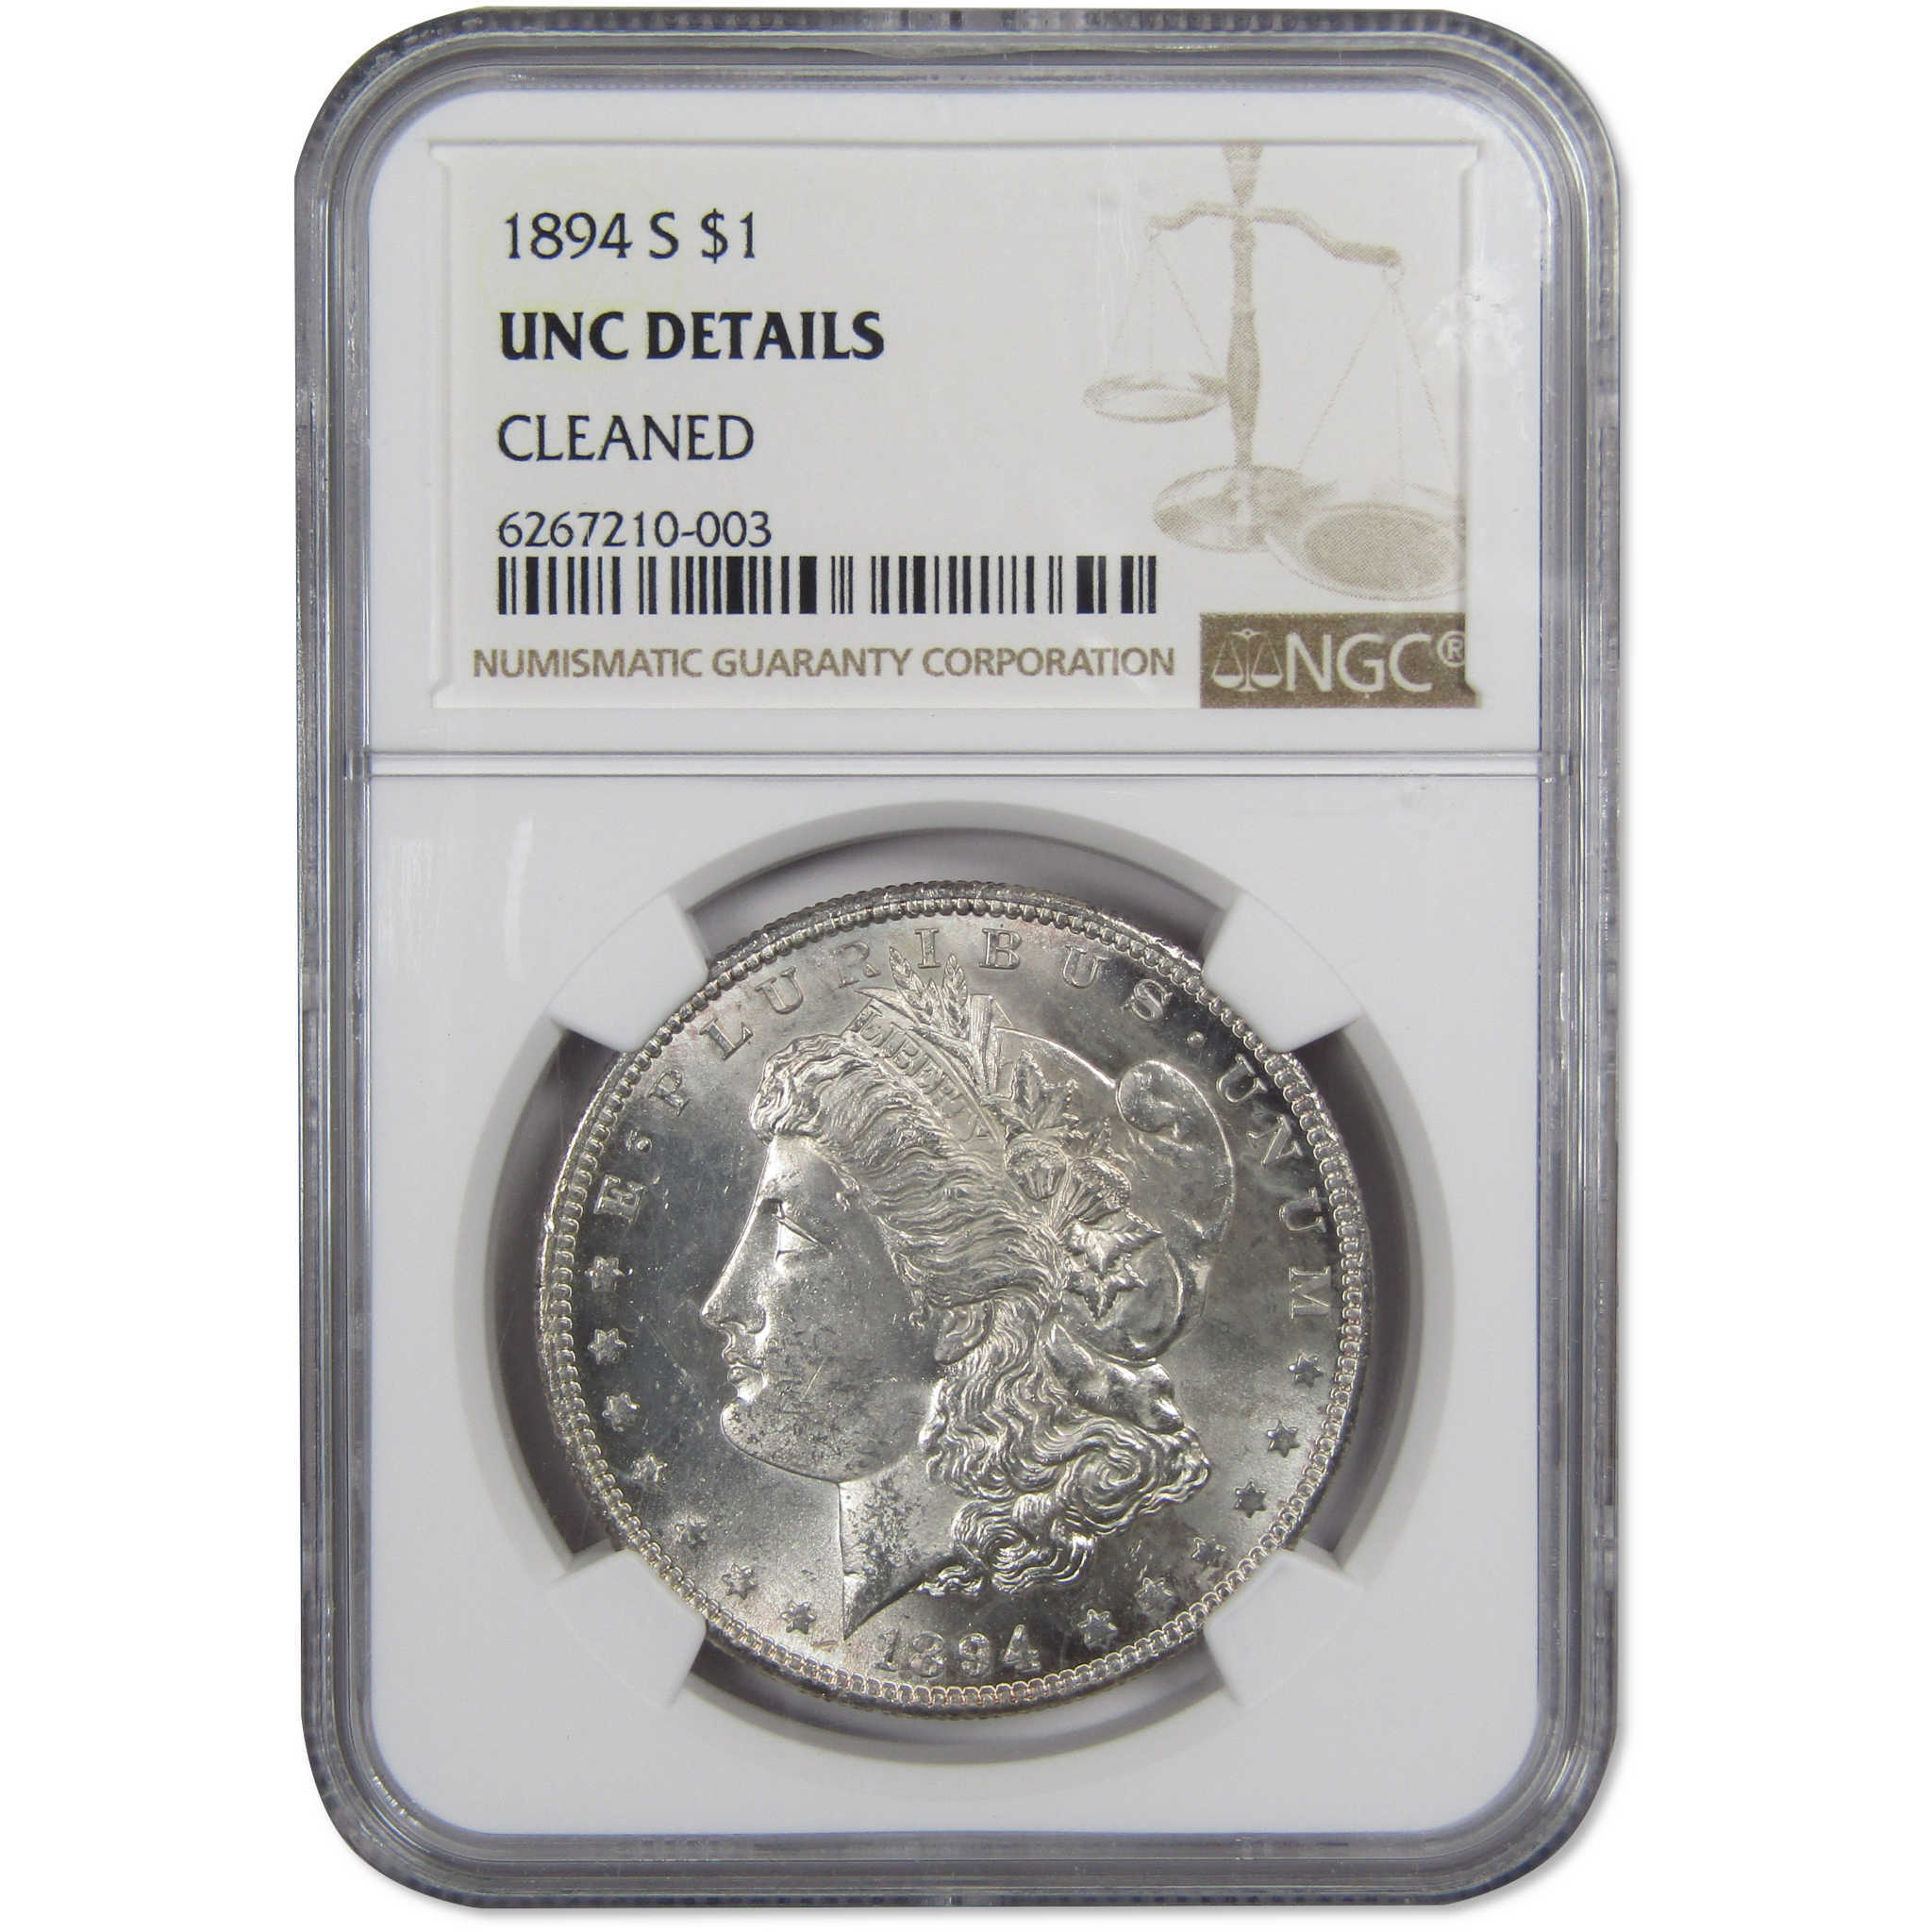 1894 S Morgan Dollar Uncirculated Details NGC 90% Silver SKU:IPC6870 - Morgan coin - Morgan silver dollar - Morgan silver dollar for sale - Profile Coins &amp; Collectibles